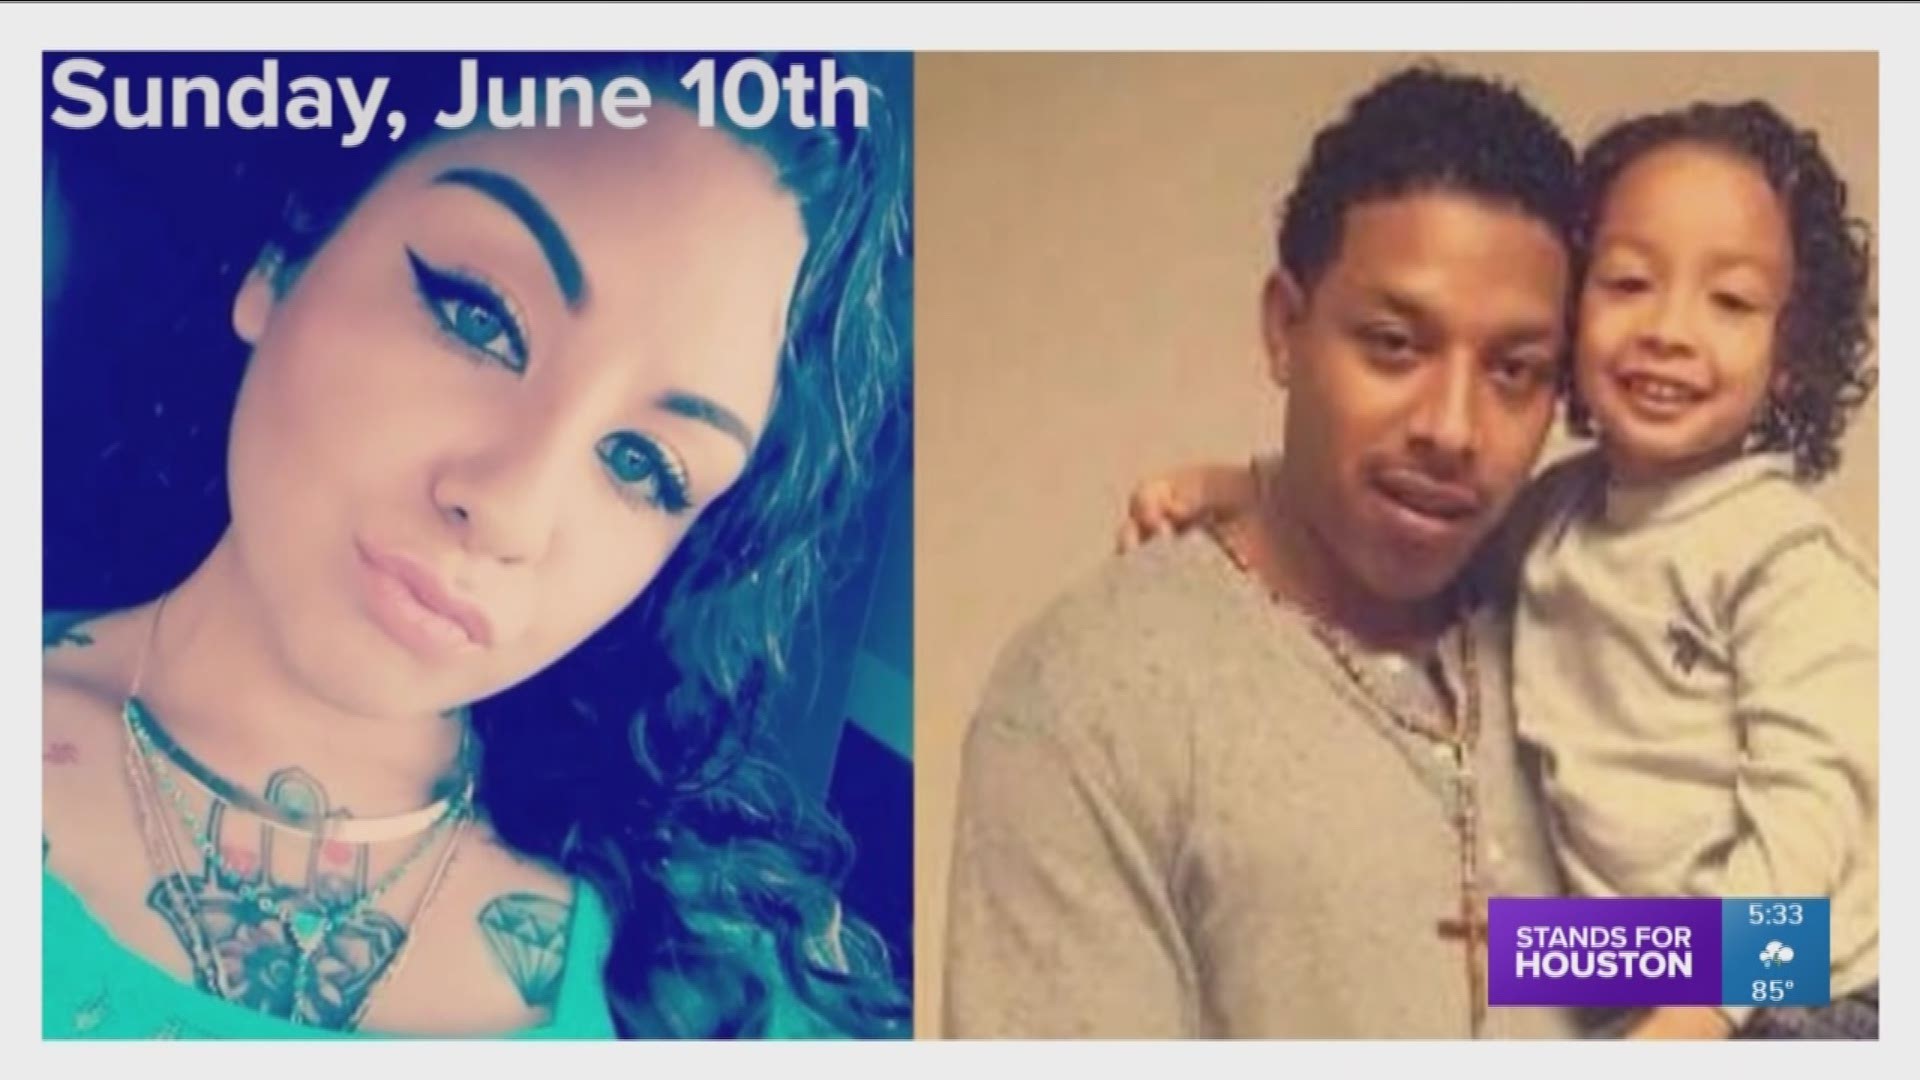 A timeline of events in the missing Angleton family of 3 found burned in Wharton County